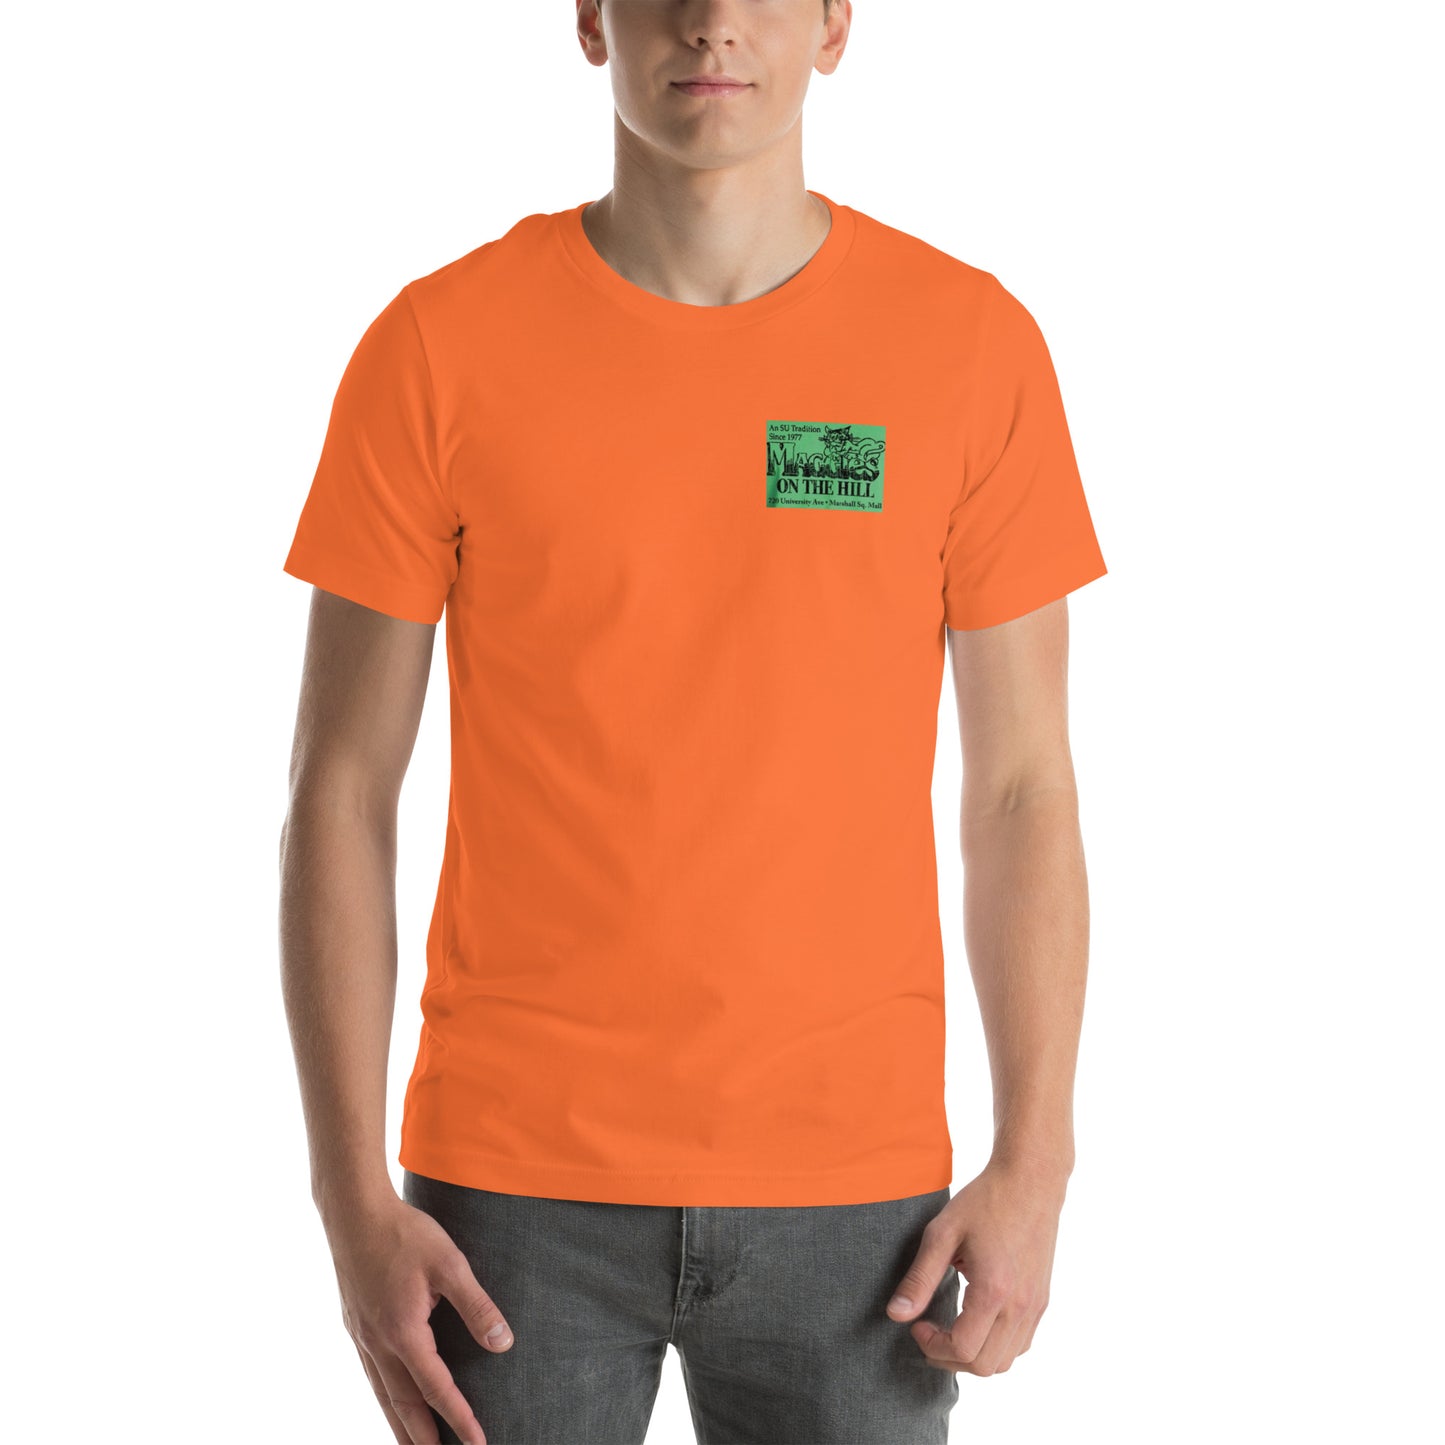 Orange T-shirt with "Maggie's" green and black logo on the front and "Throwback" on the back.   